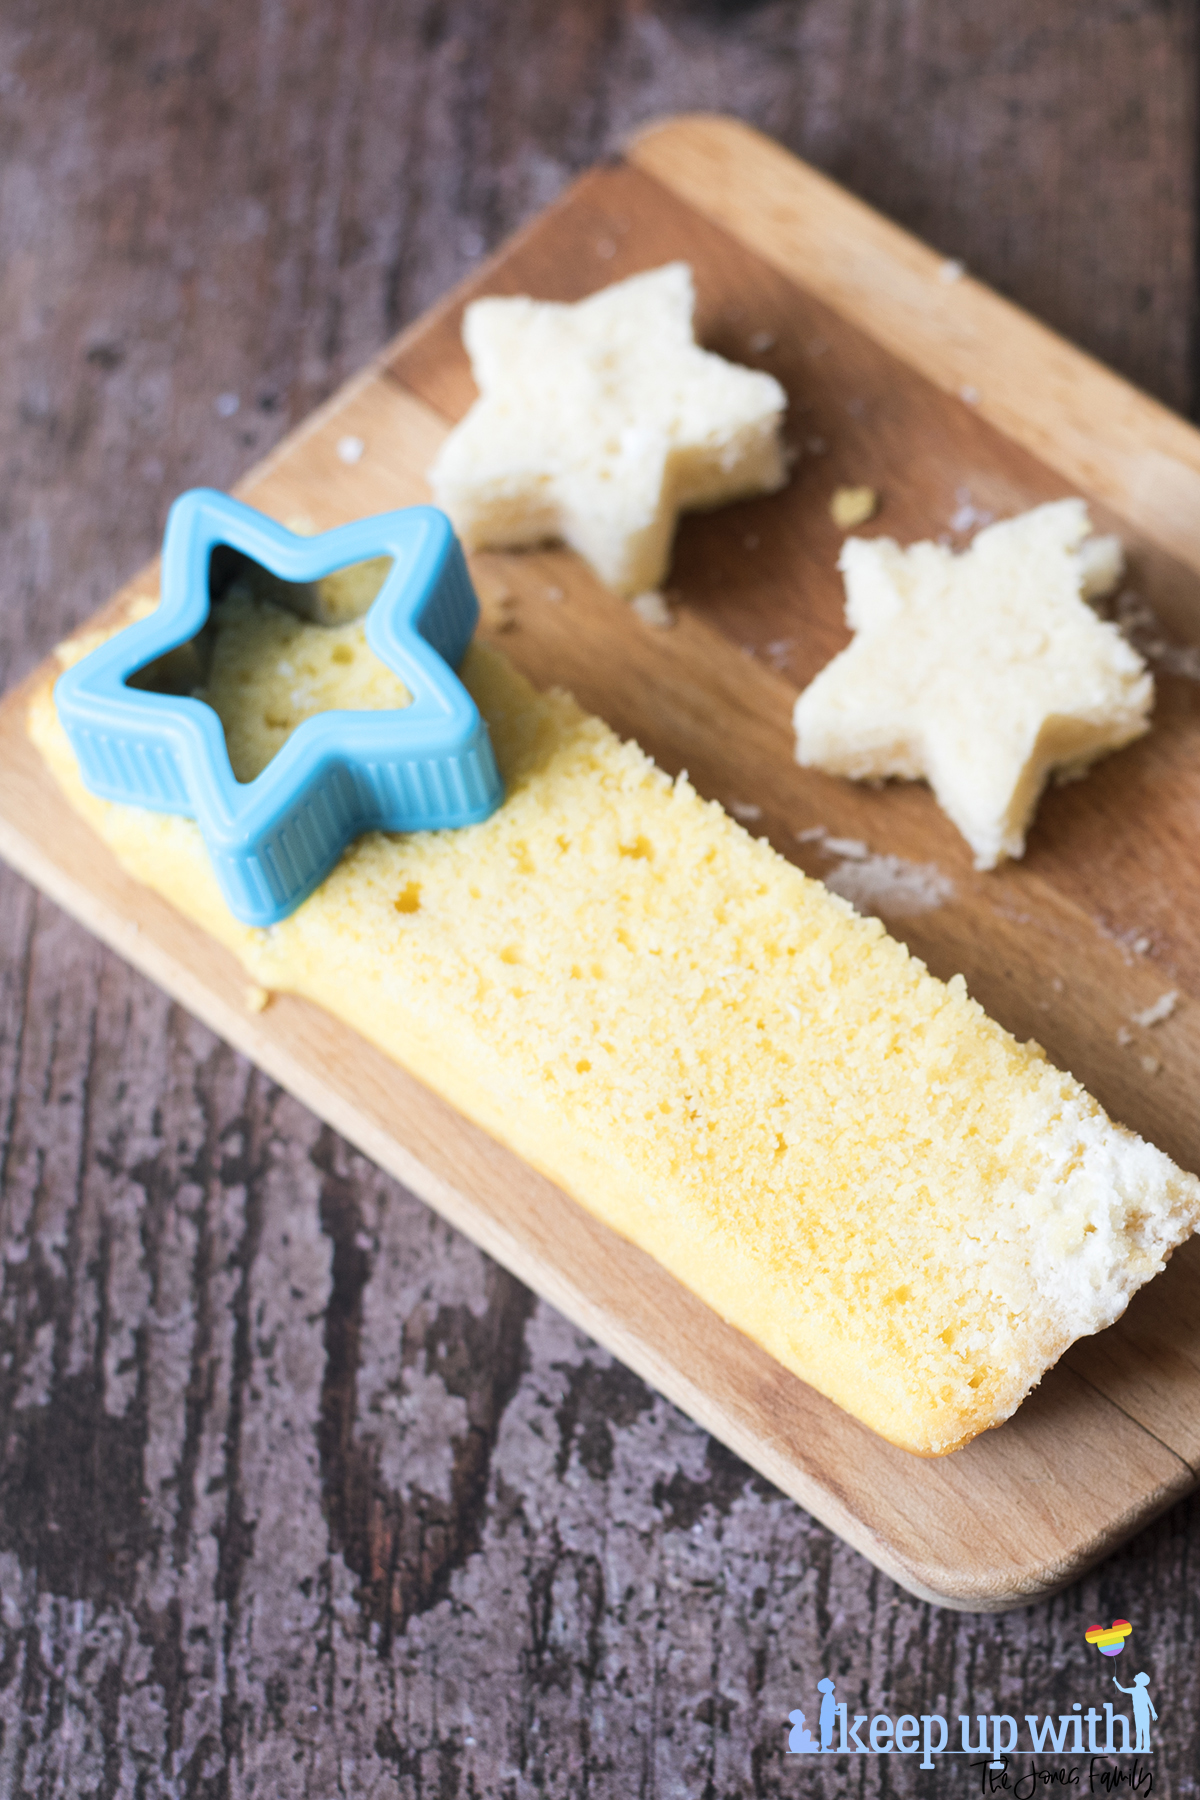 Image shows vanilla angel cake stars being cut from a slice of cake using a blue star cookie cutter, on top of a wooden chopping board, resting on a dark wooden tabletop. Image by Sara-Jayne Jones of Keep Up With The Jones Family.